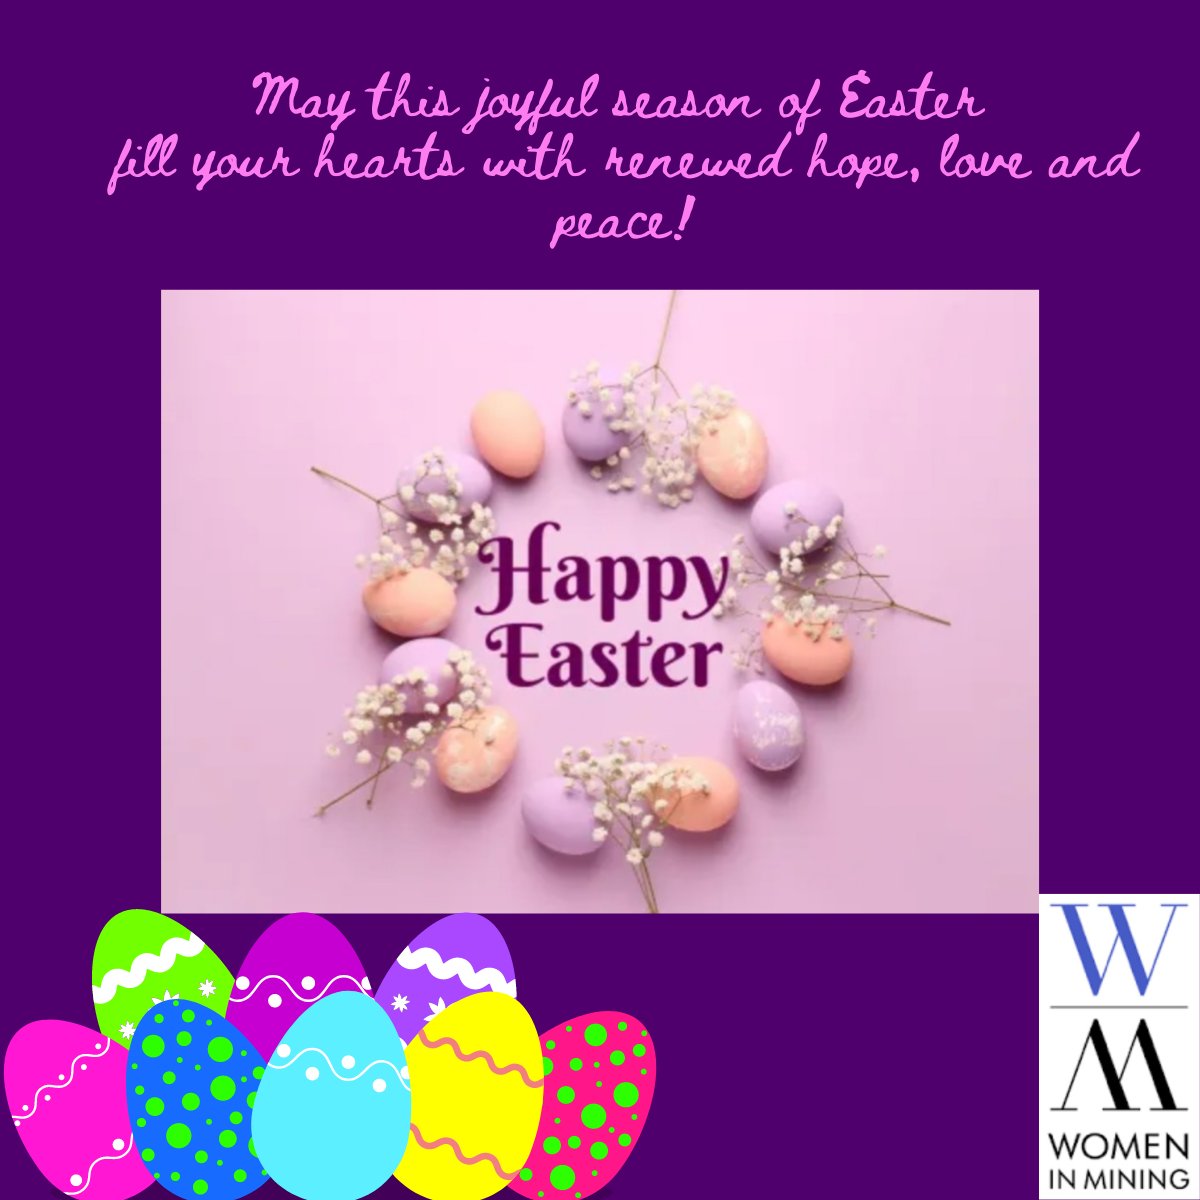 Happy Easter from all of us at Women In Mining UK (WIM UK)!